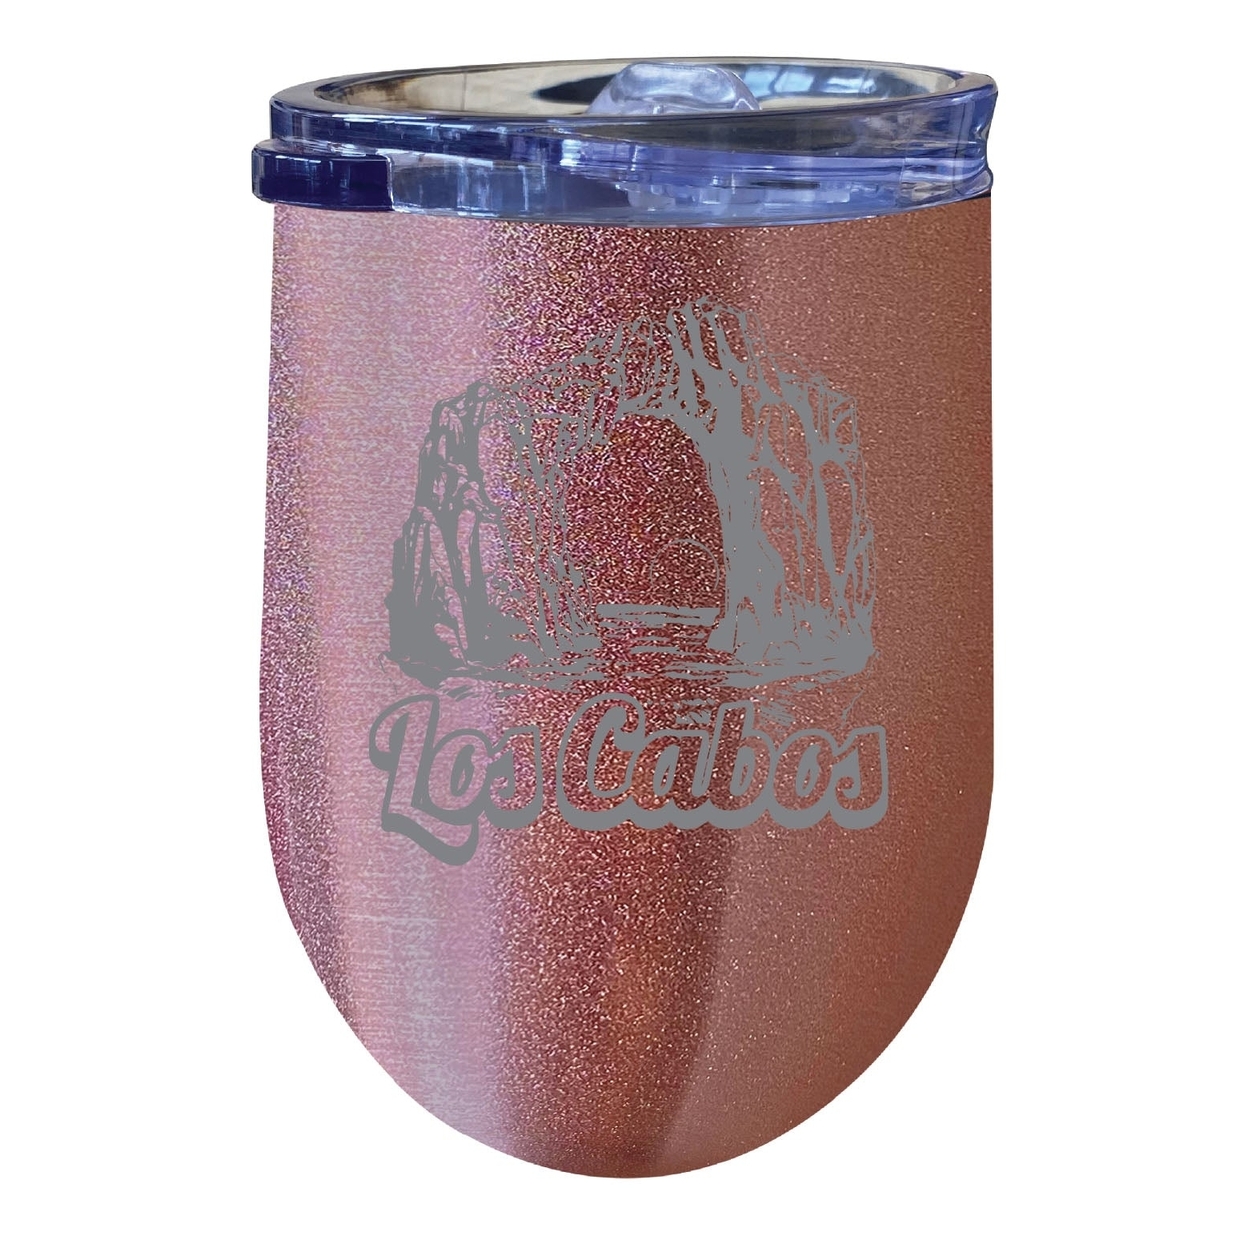 Los Cabos Mexico Souvenir 12 Oz Engraved Insulated Wine Stainless Steel Tumbler - Rose Gold,,2-Pack